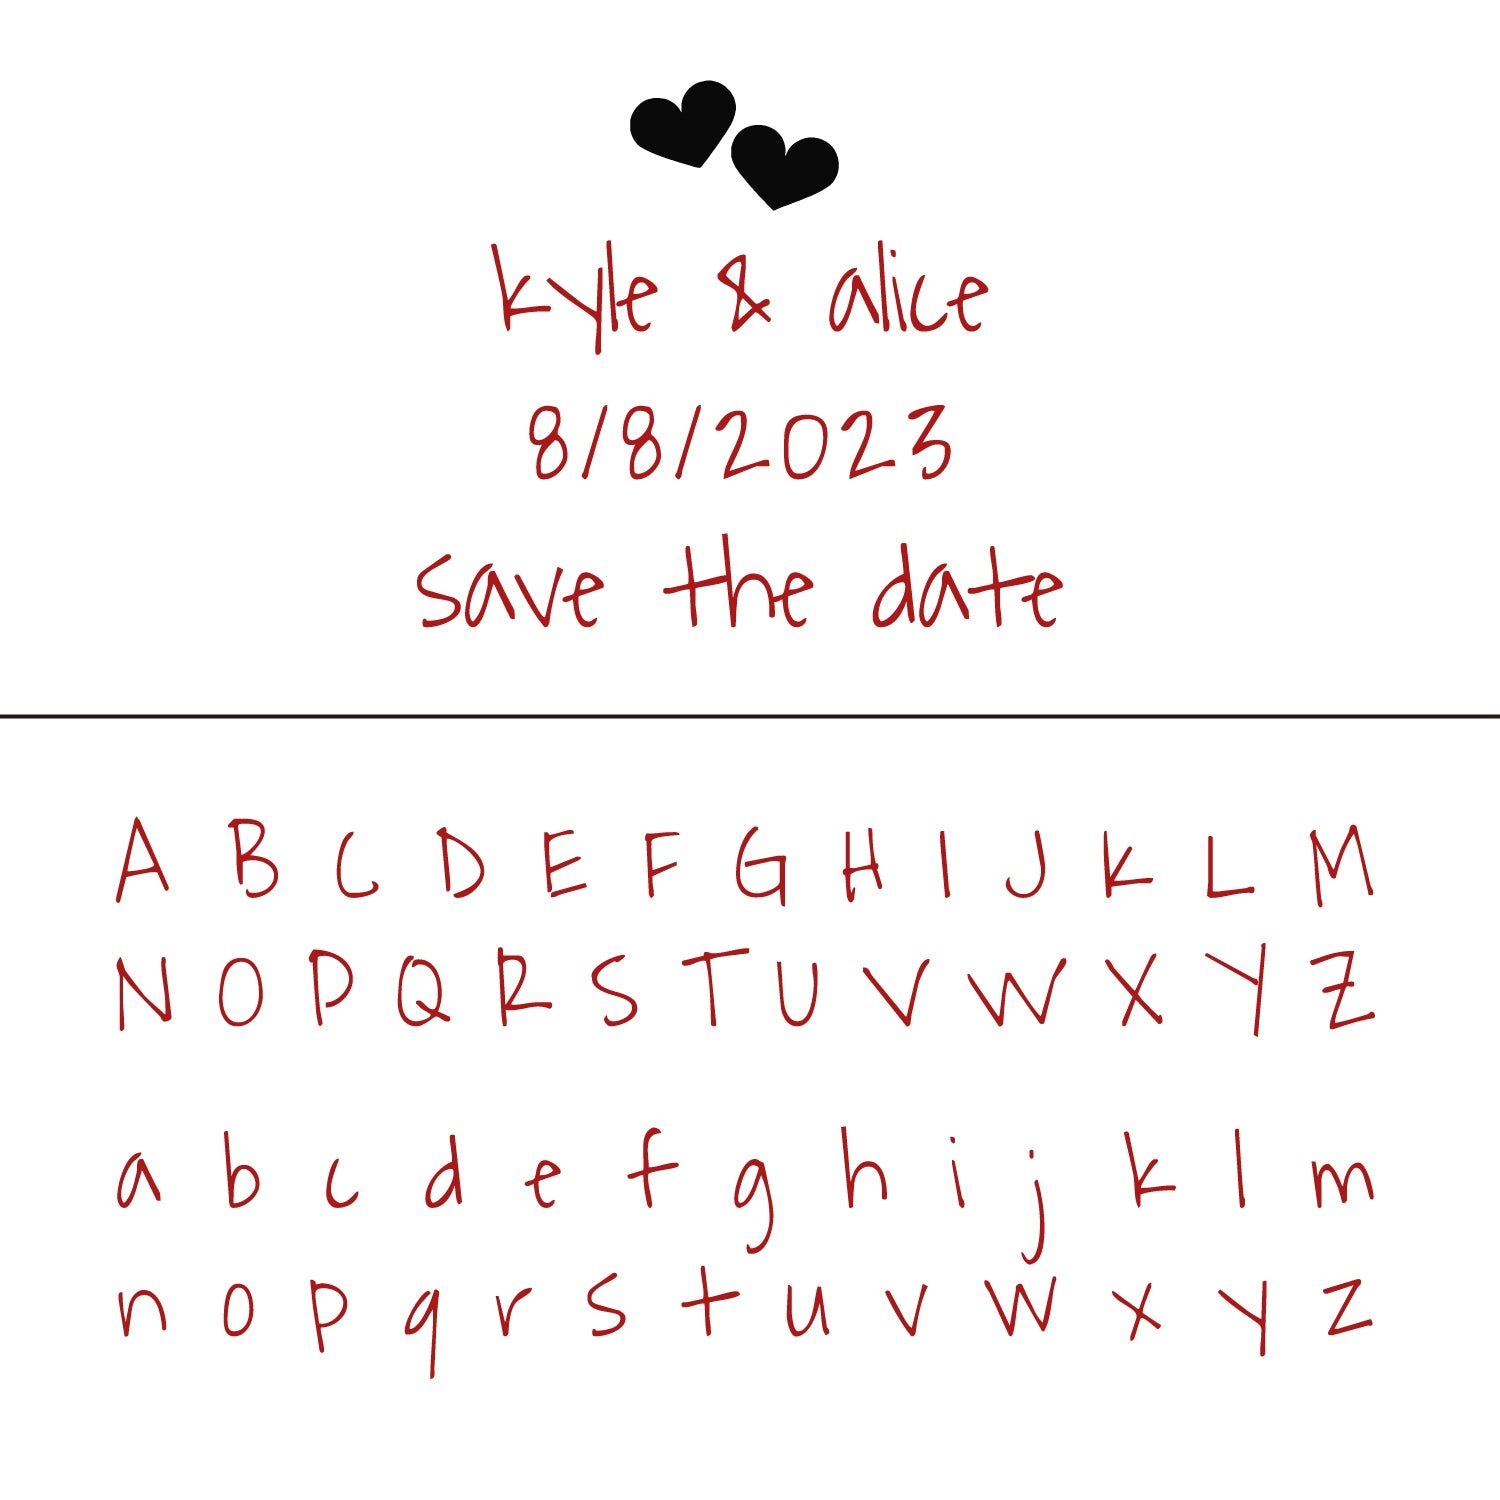 Custom Funtastic Font Wedding Save the Date Rubber Stamp 23